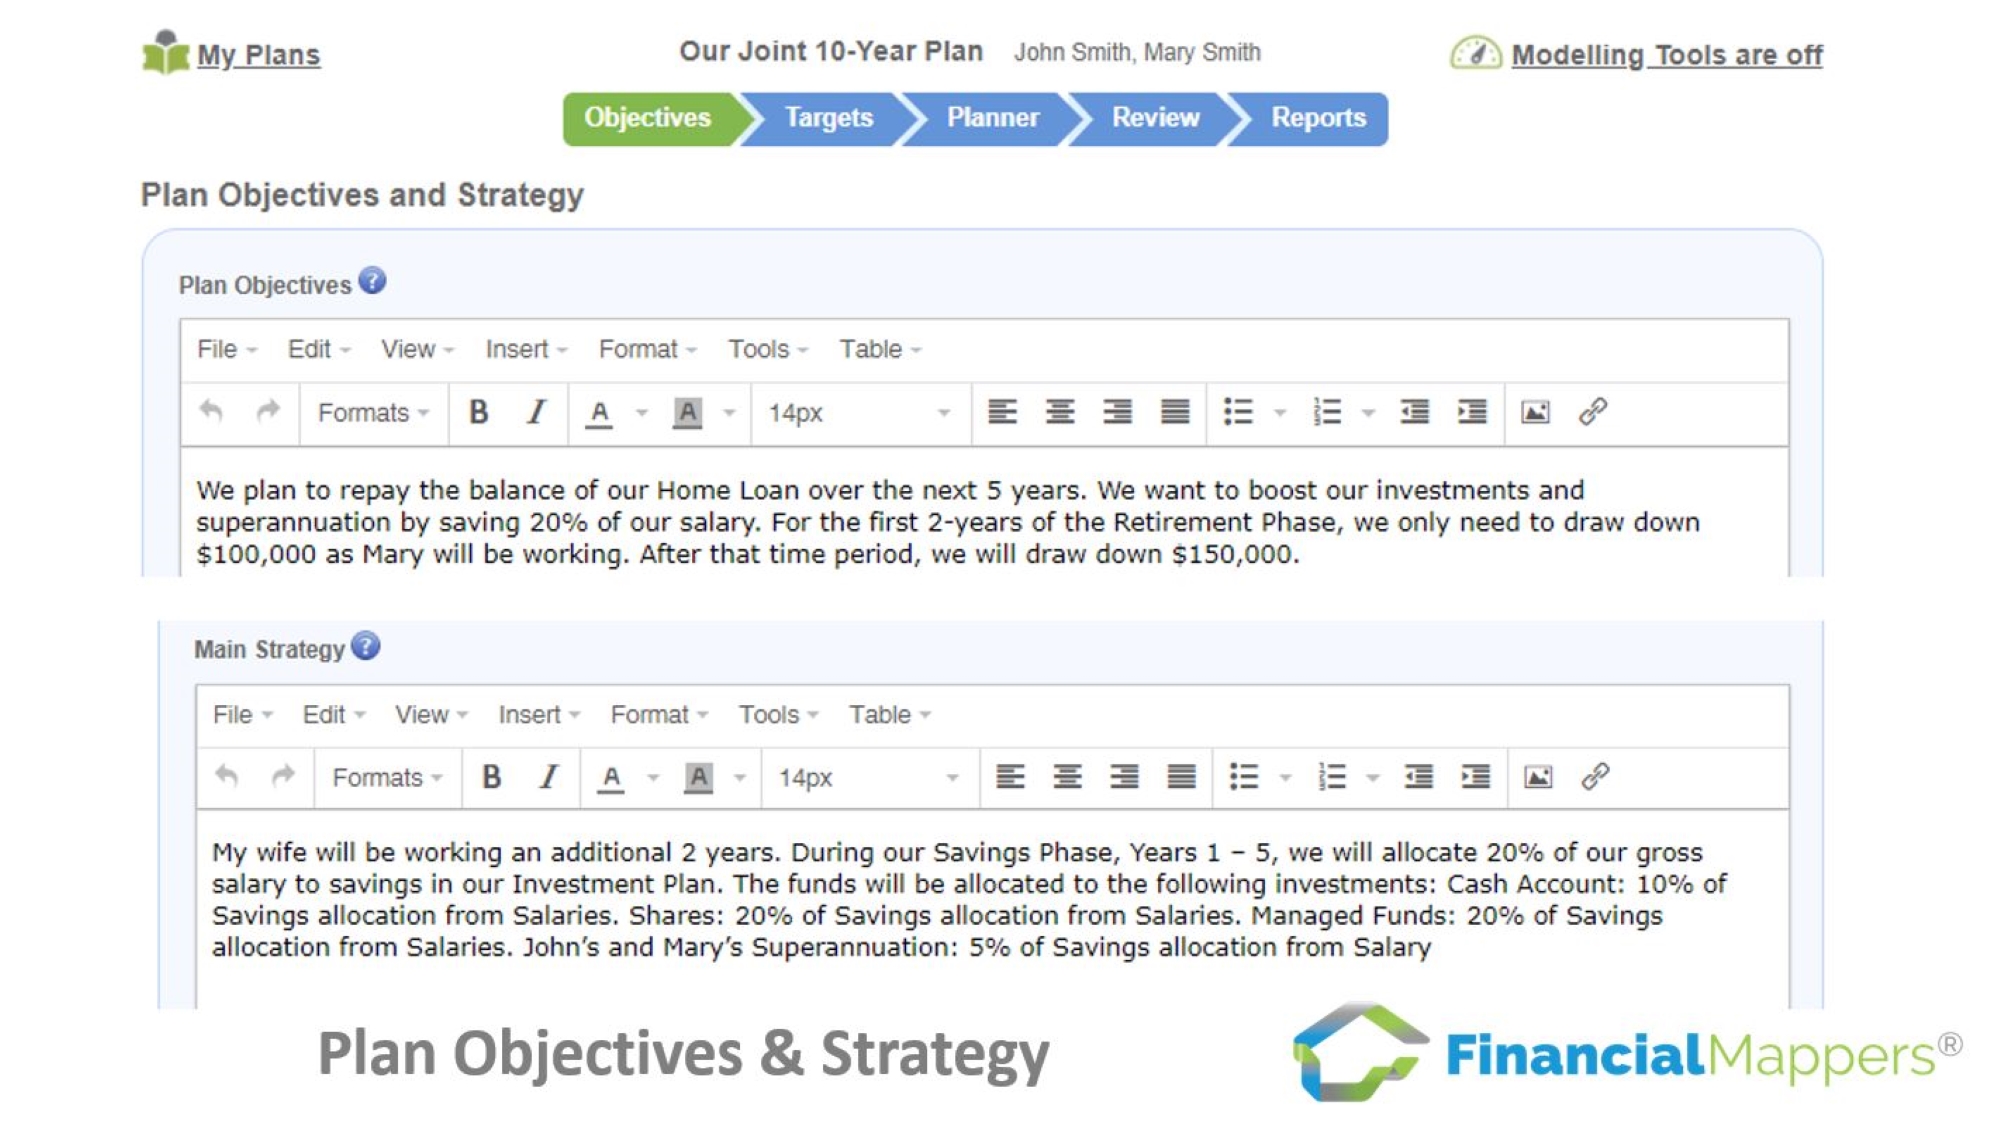 Joint financial plan showing Plan Objectives and Strategy to achieve objectives using Financial Mappers Cash Flow modelling software.